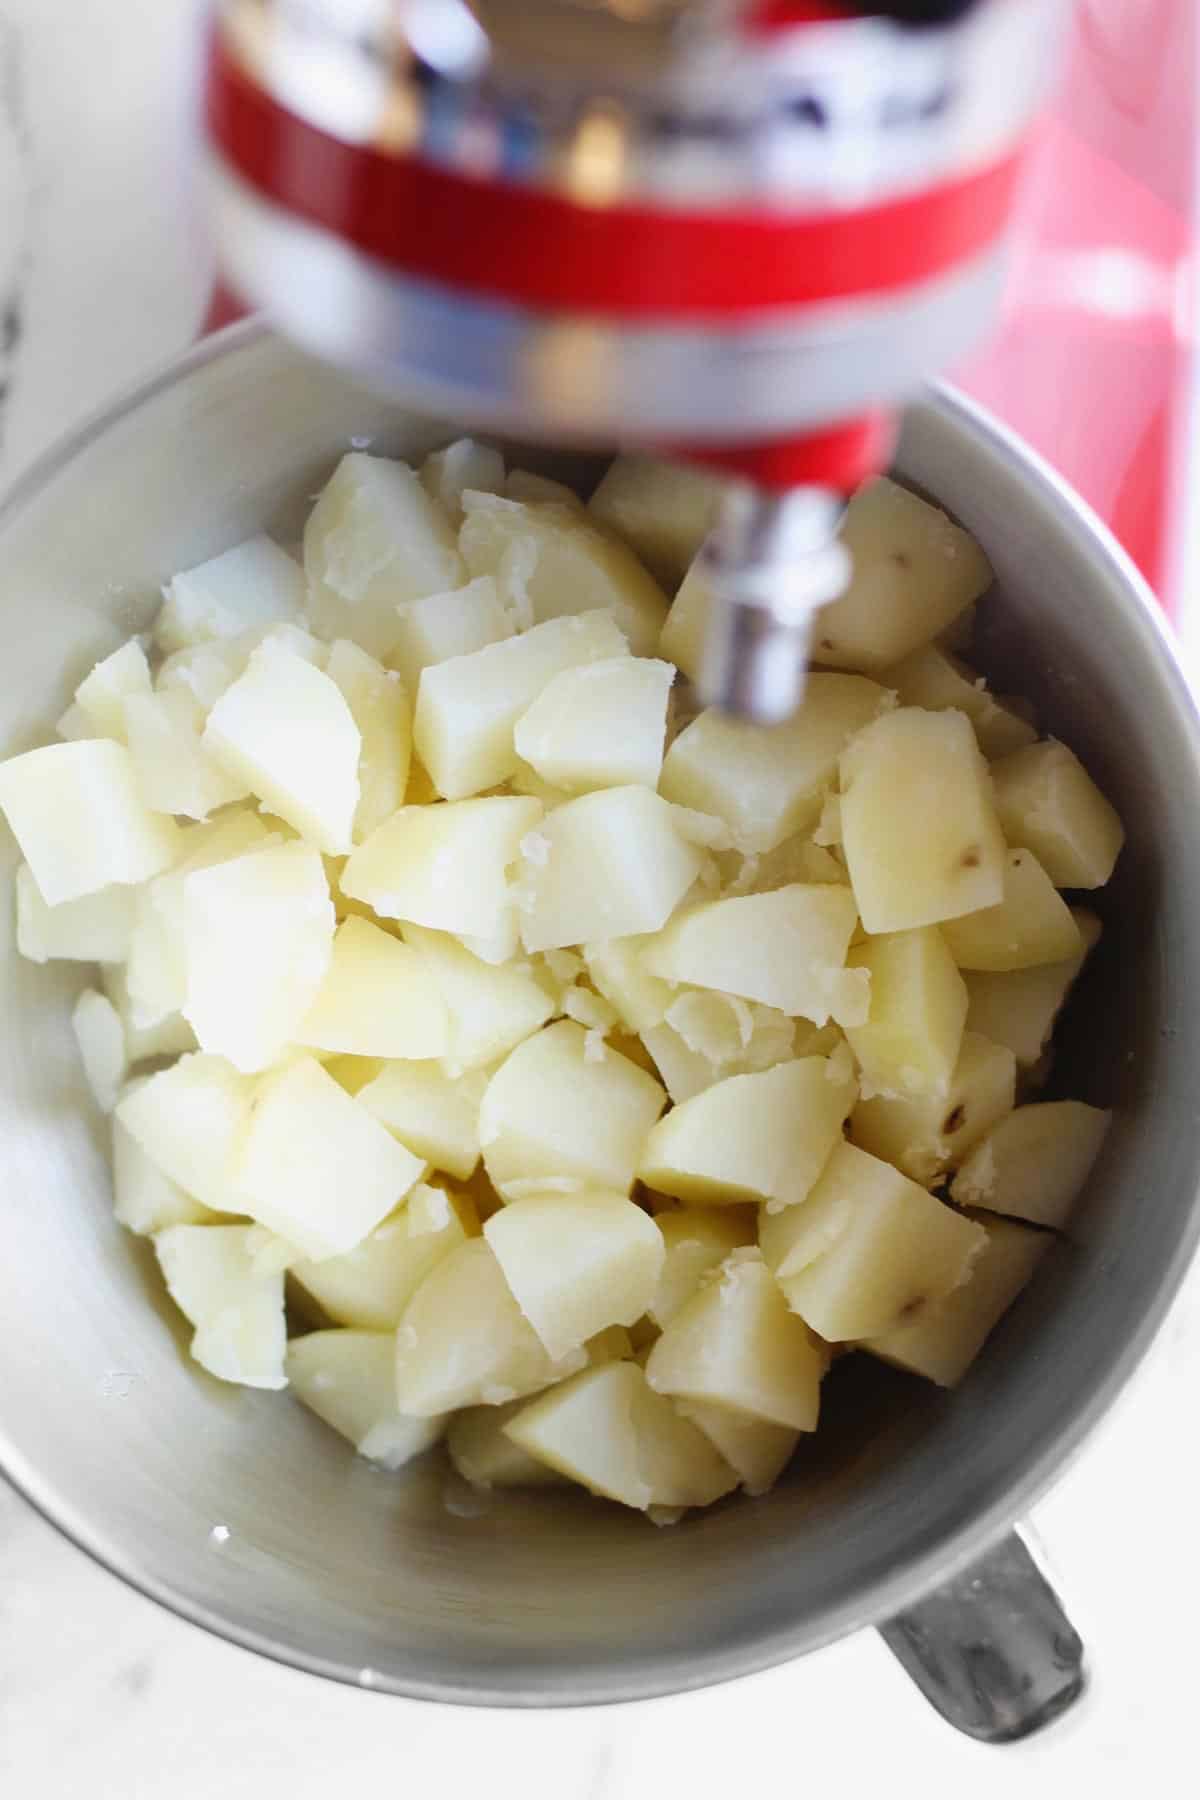 Cooked potato cubes in a stand mixing bowl